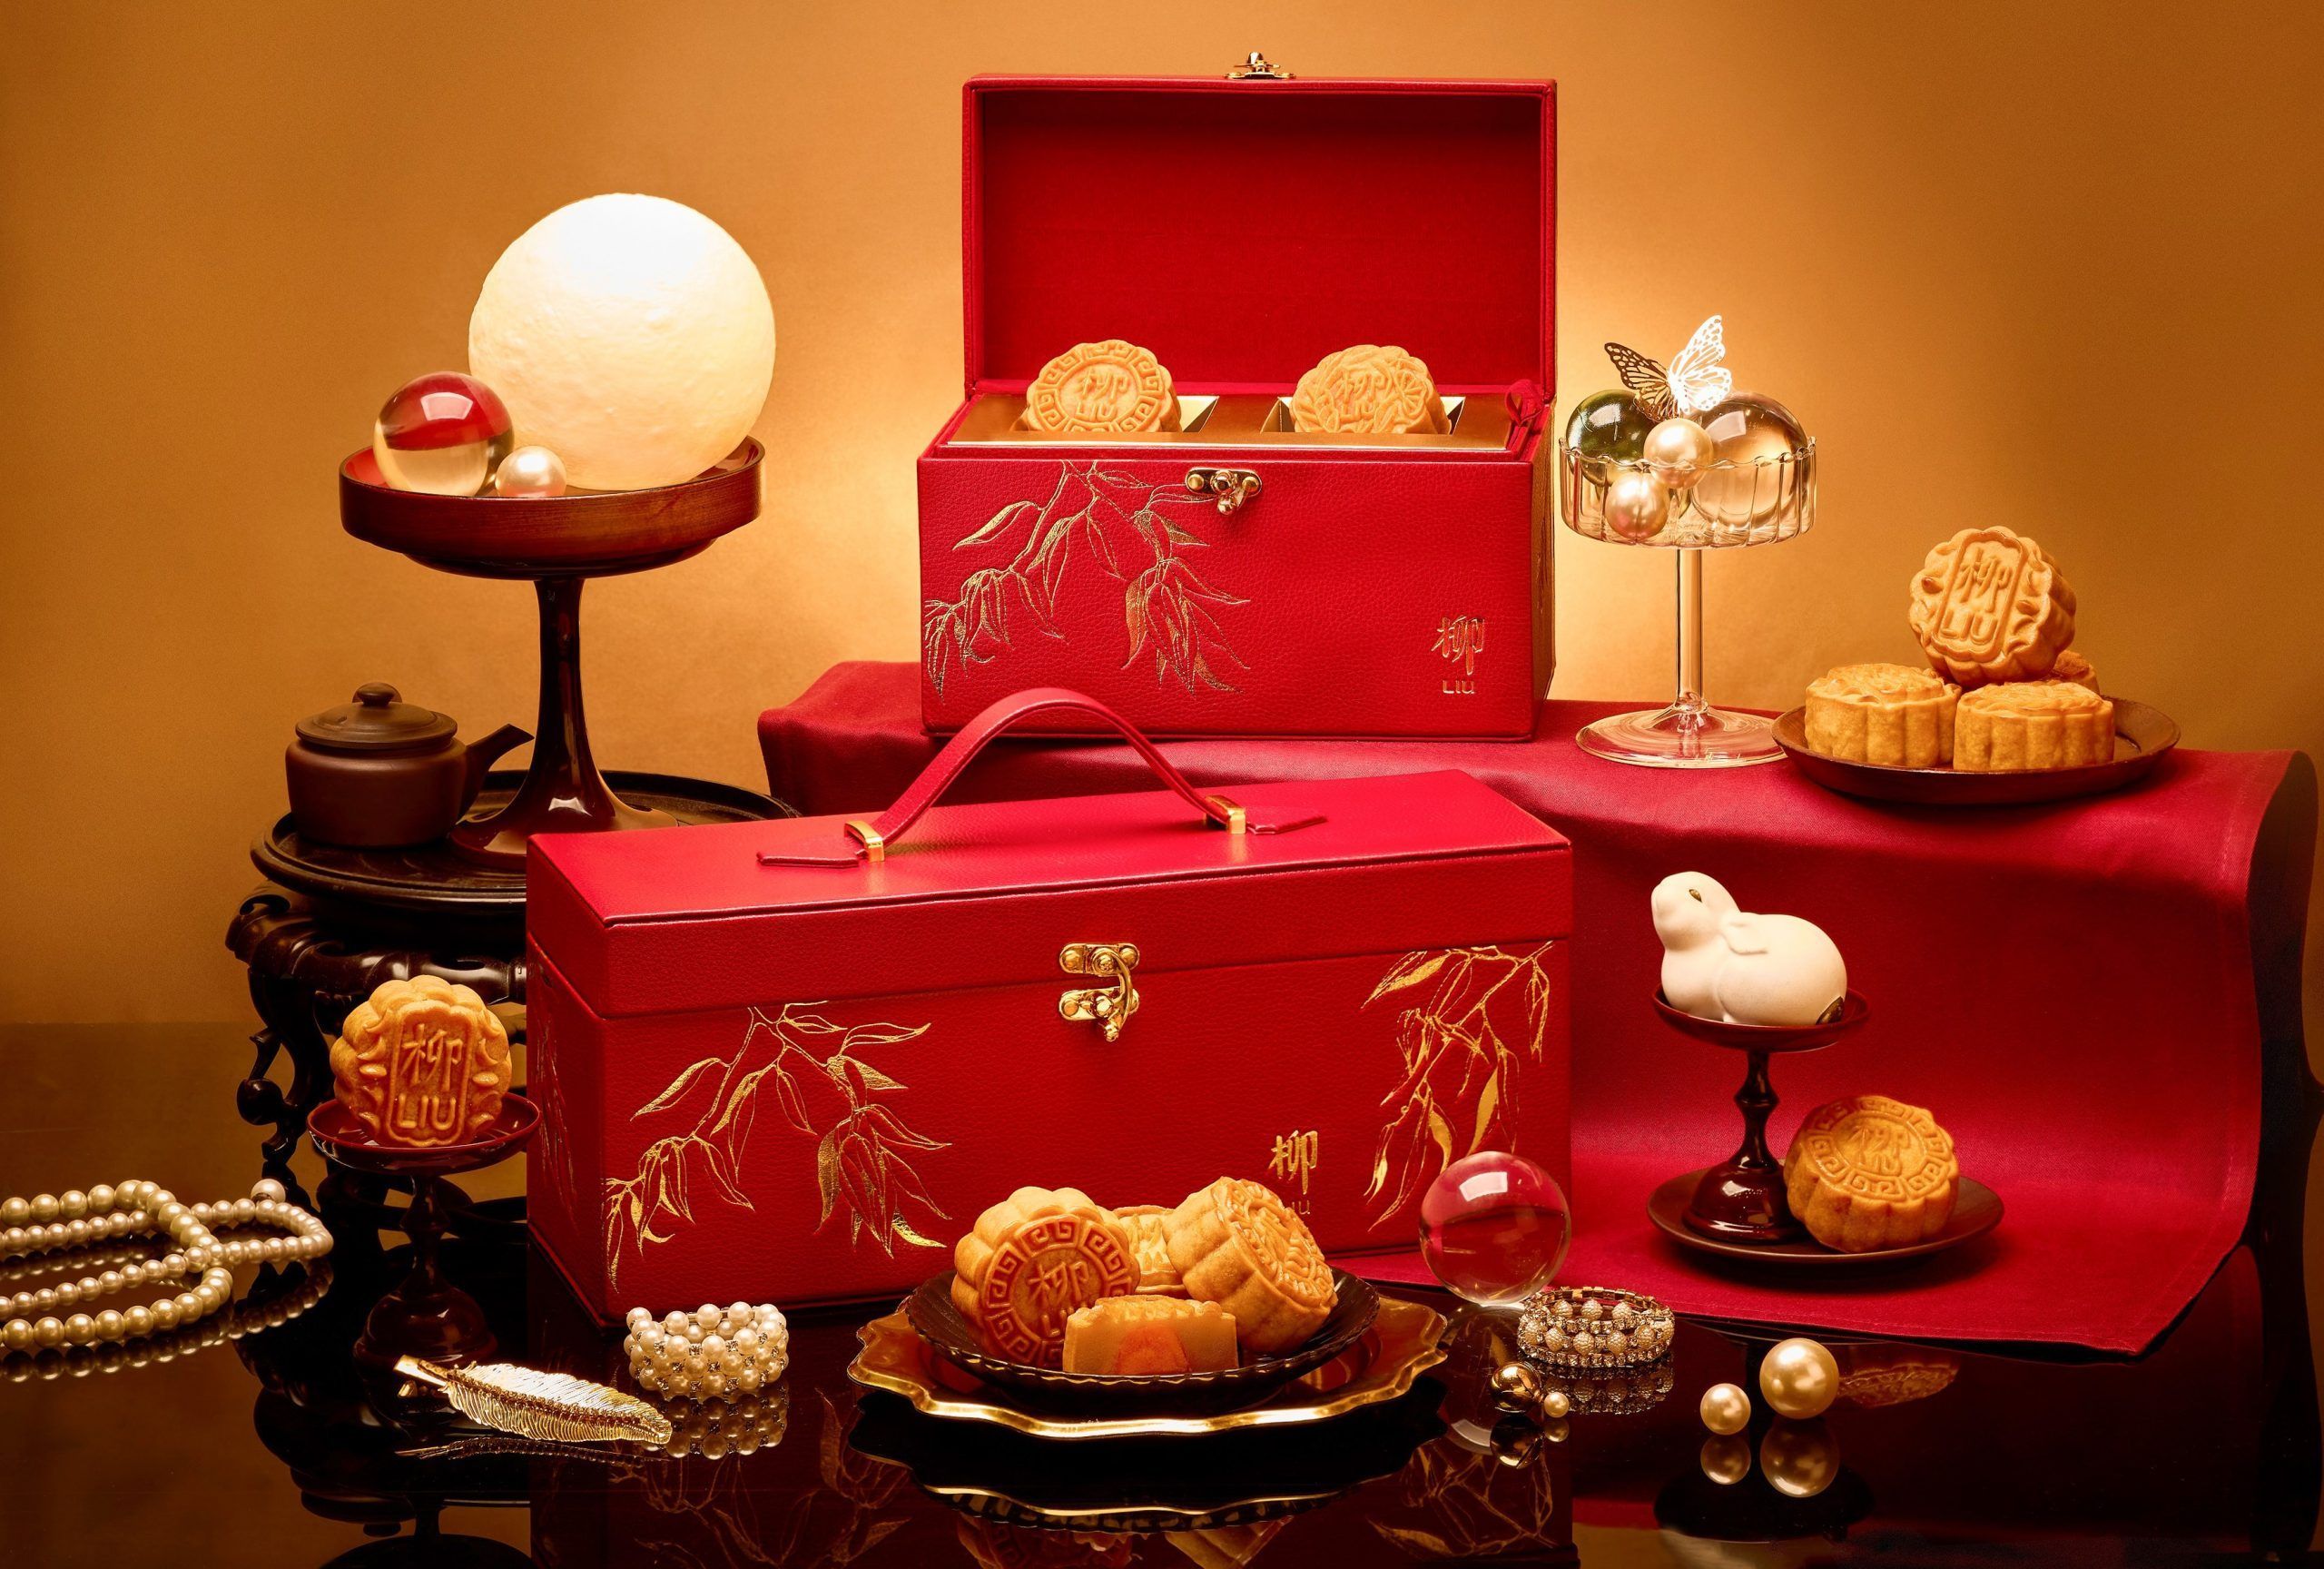 Where to Find the Best Mooncakes to Celebrate the Mid-Autumn Festival